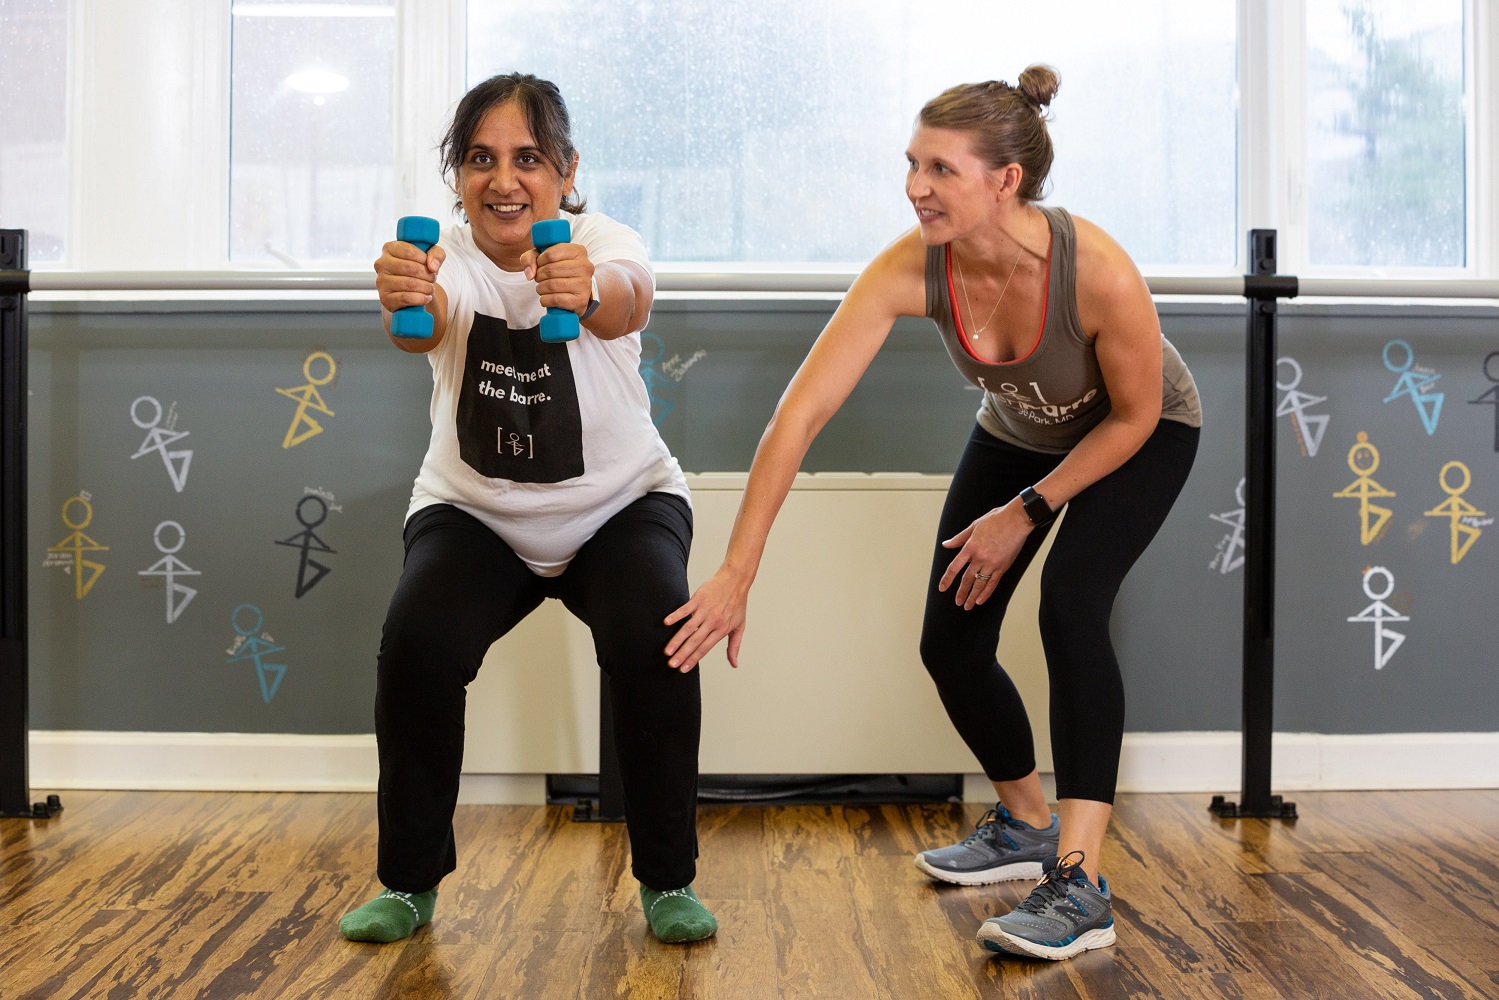 group of women squatting in clean fitness studio receiving hands on adjustment from instructor